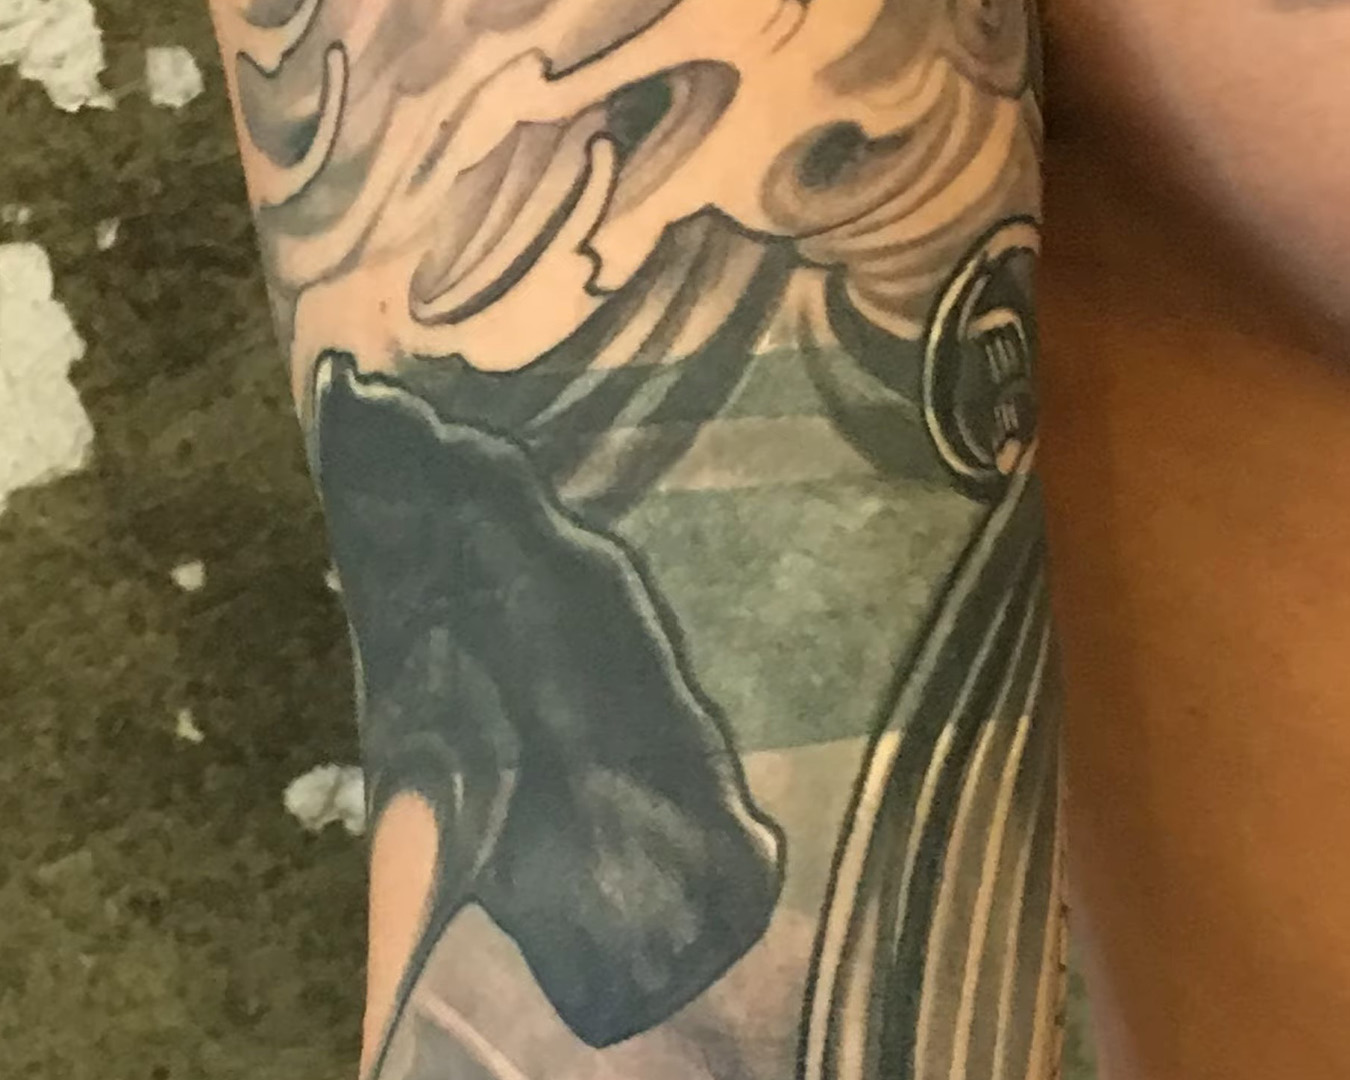 adding in gray ink to cover up black armband tattoo